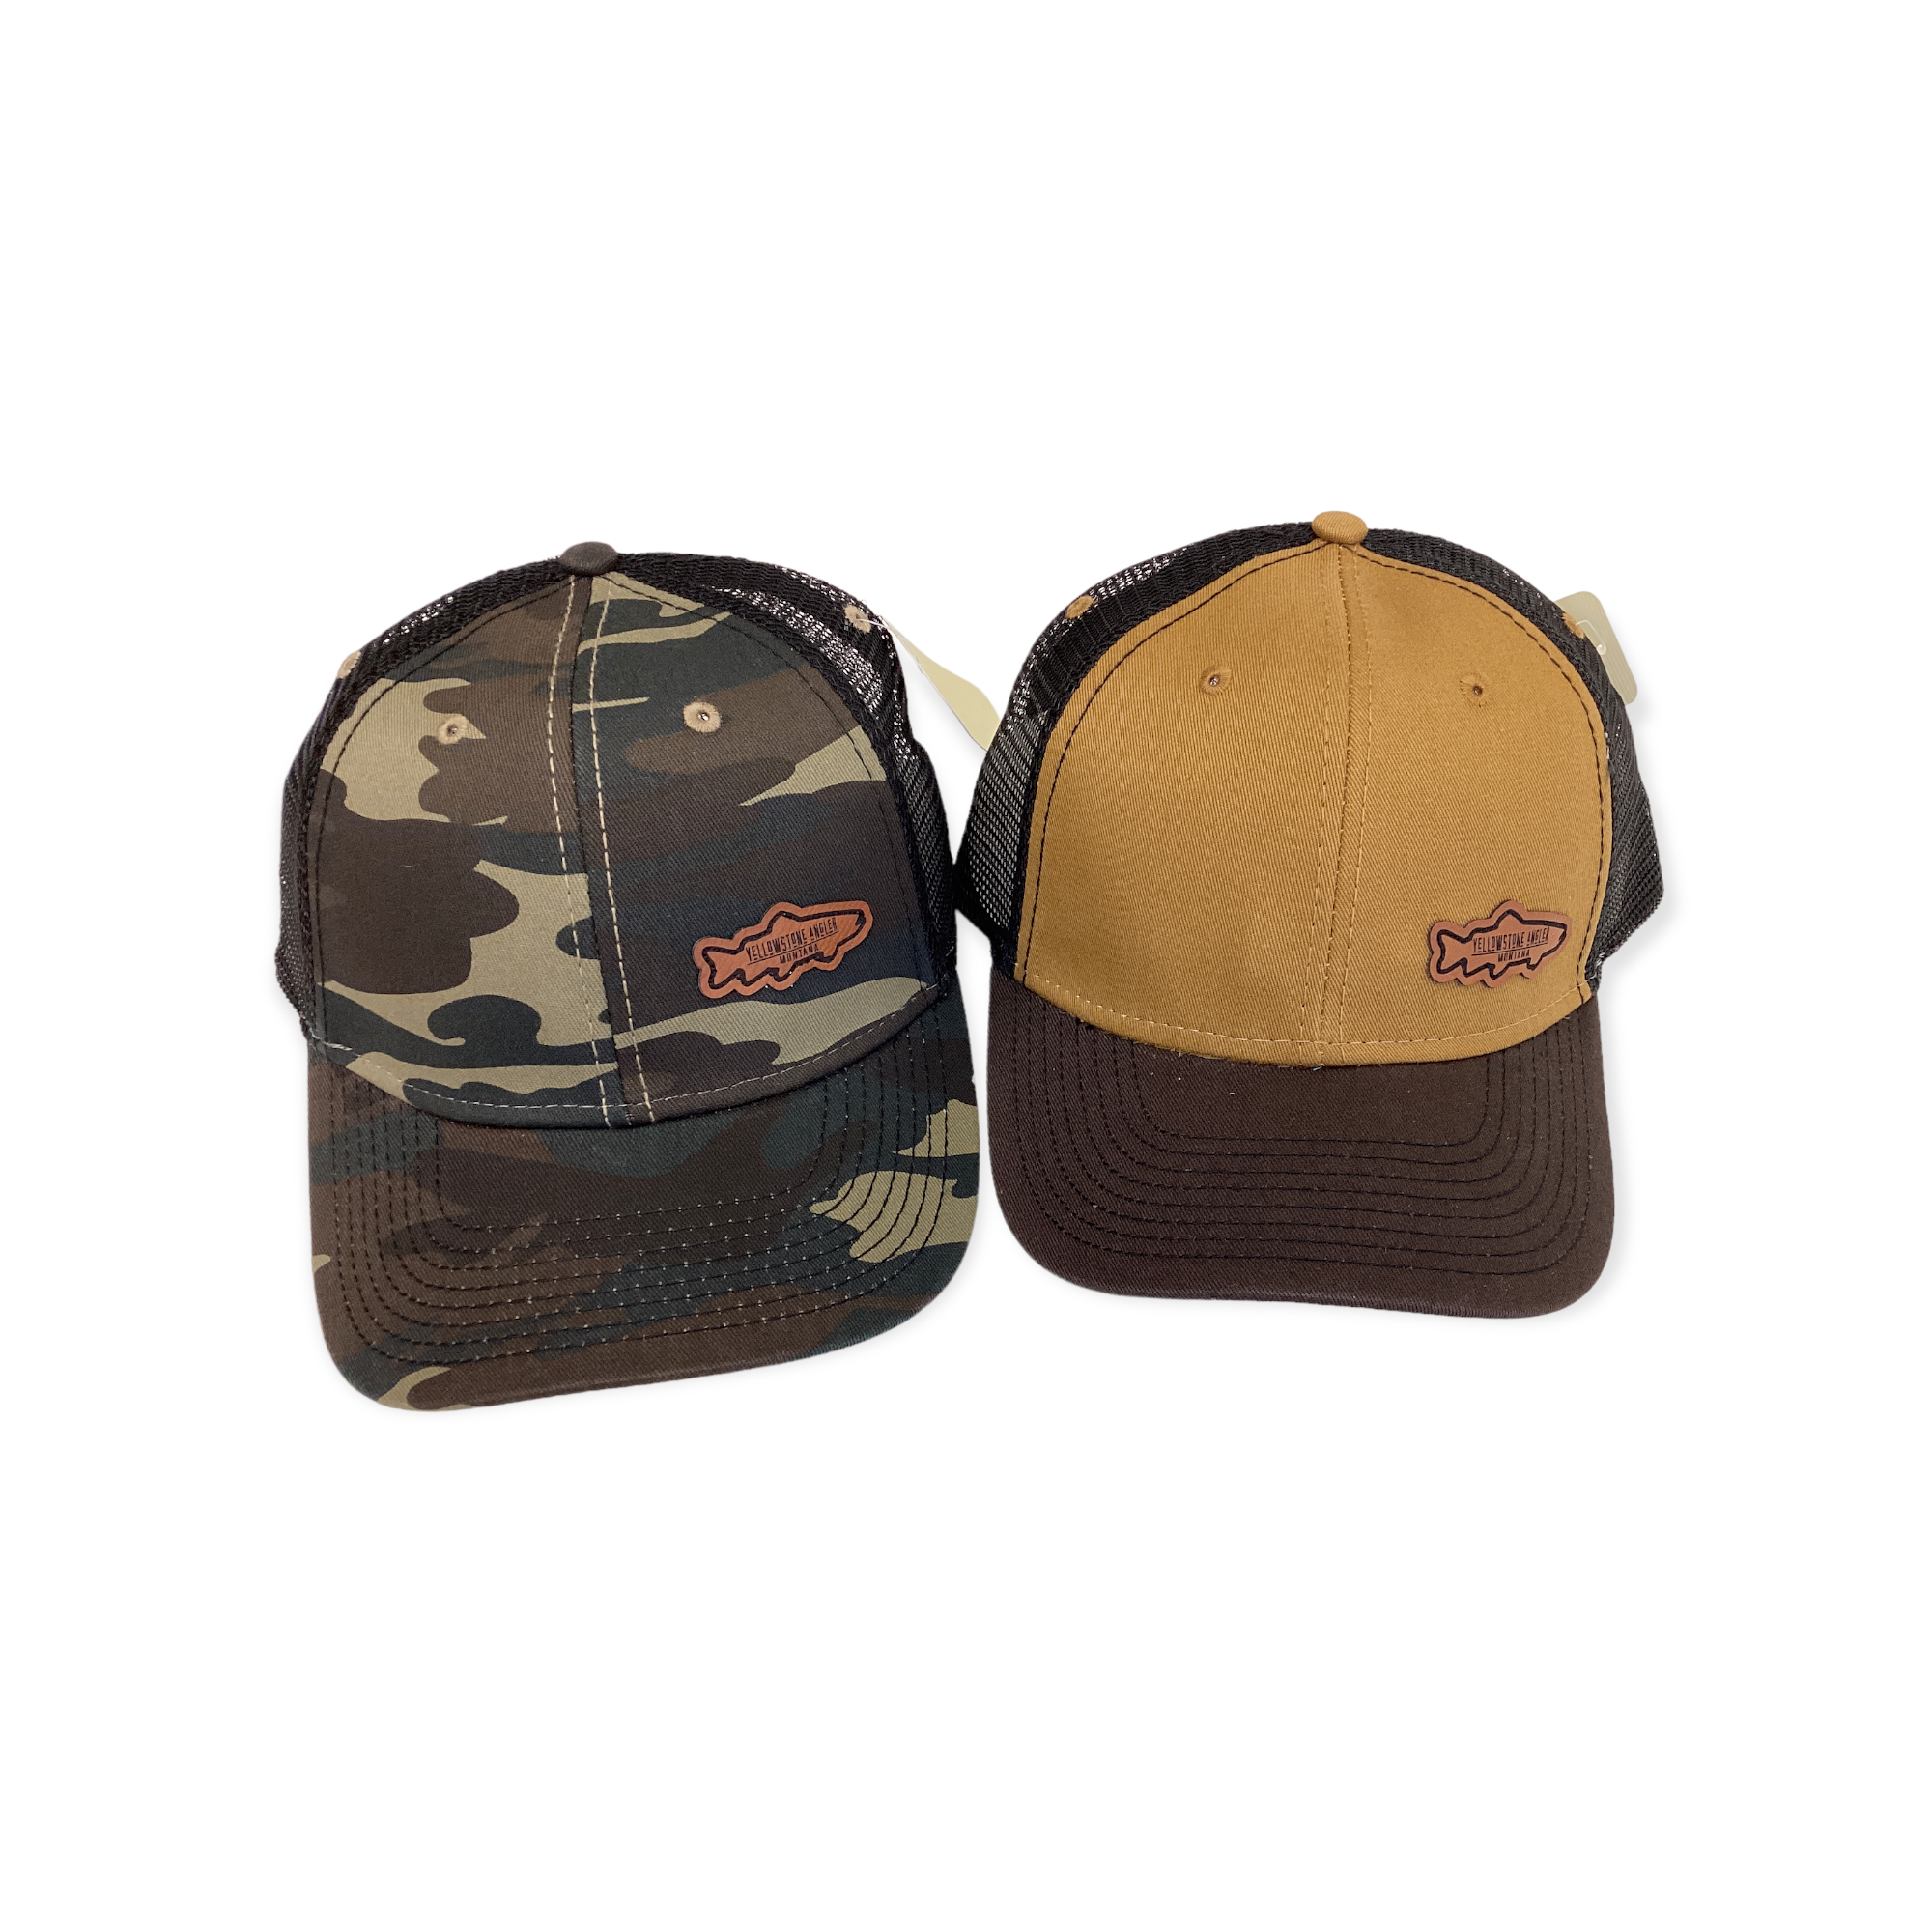 Yellowstone Angler Leather Trout Patch Sideline Cap